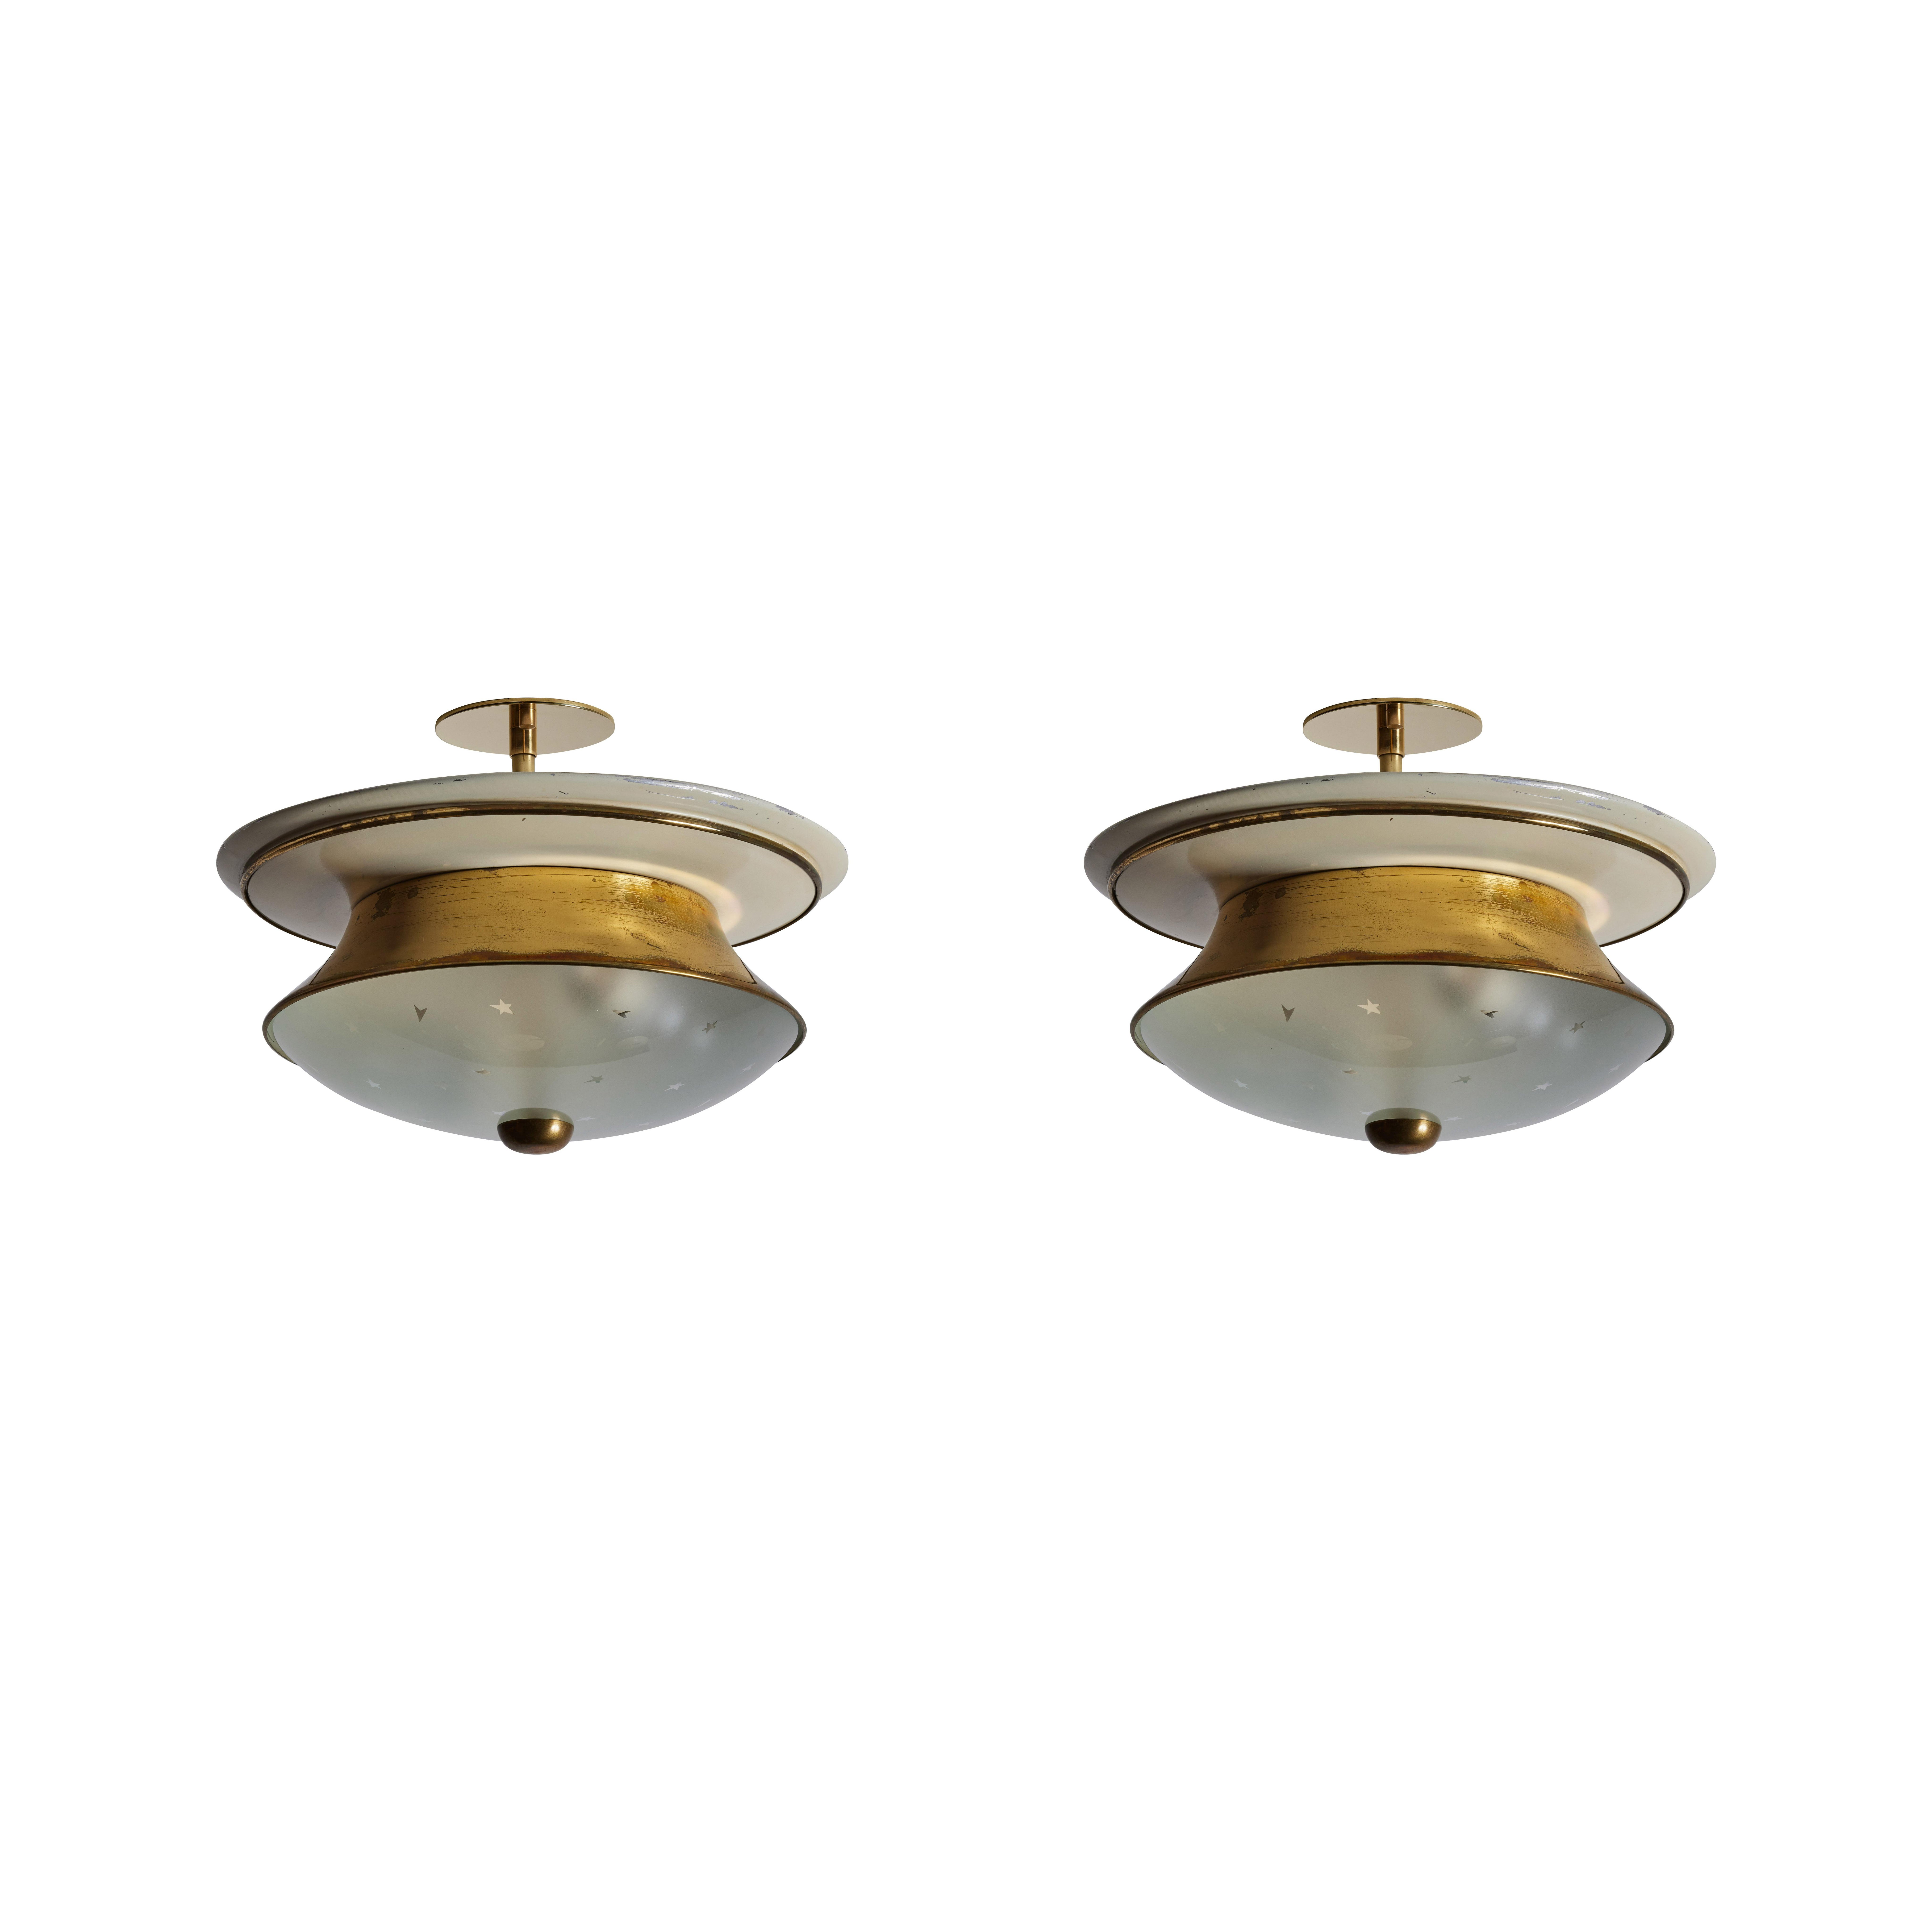 Pair of flush mount ceiling lights by Lumi. Designed and manufactured in Italy, circa the 1950's. Glass diffusers are decorated with stars throughout. Aged brass and enameled hardware. Custom backplate for US standards. Holds two E14 sockets. Bulbs